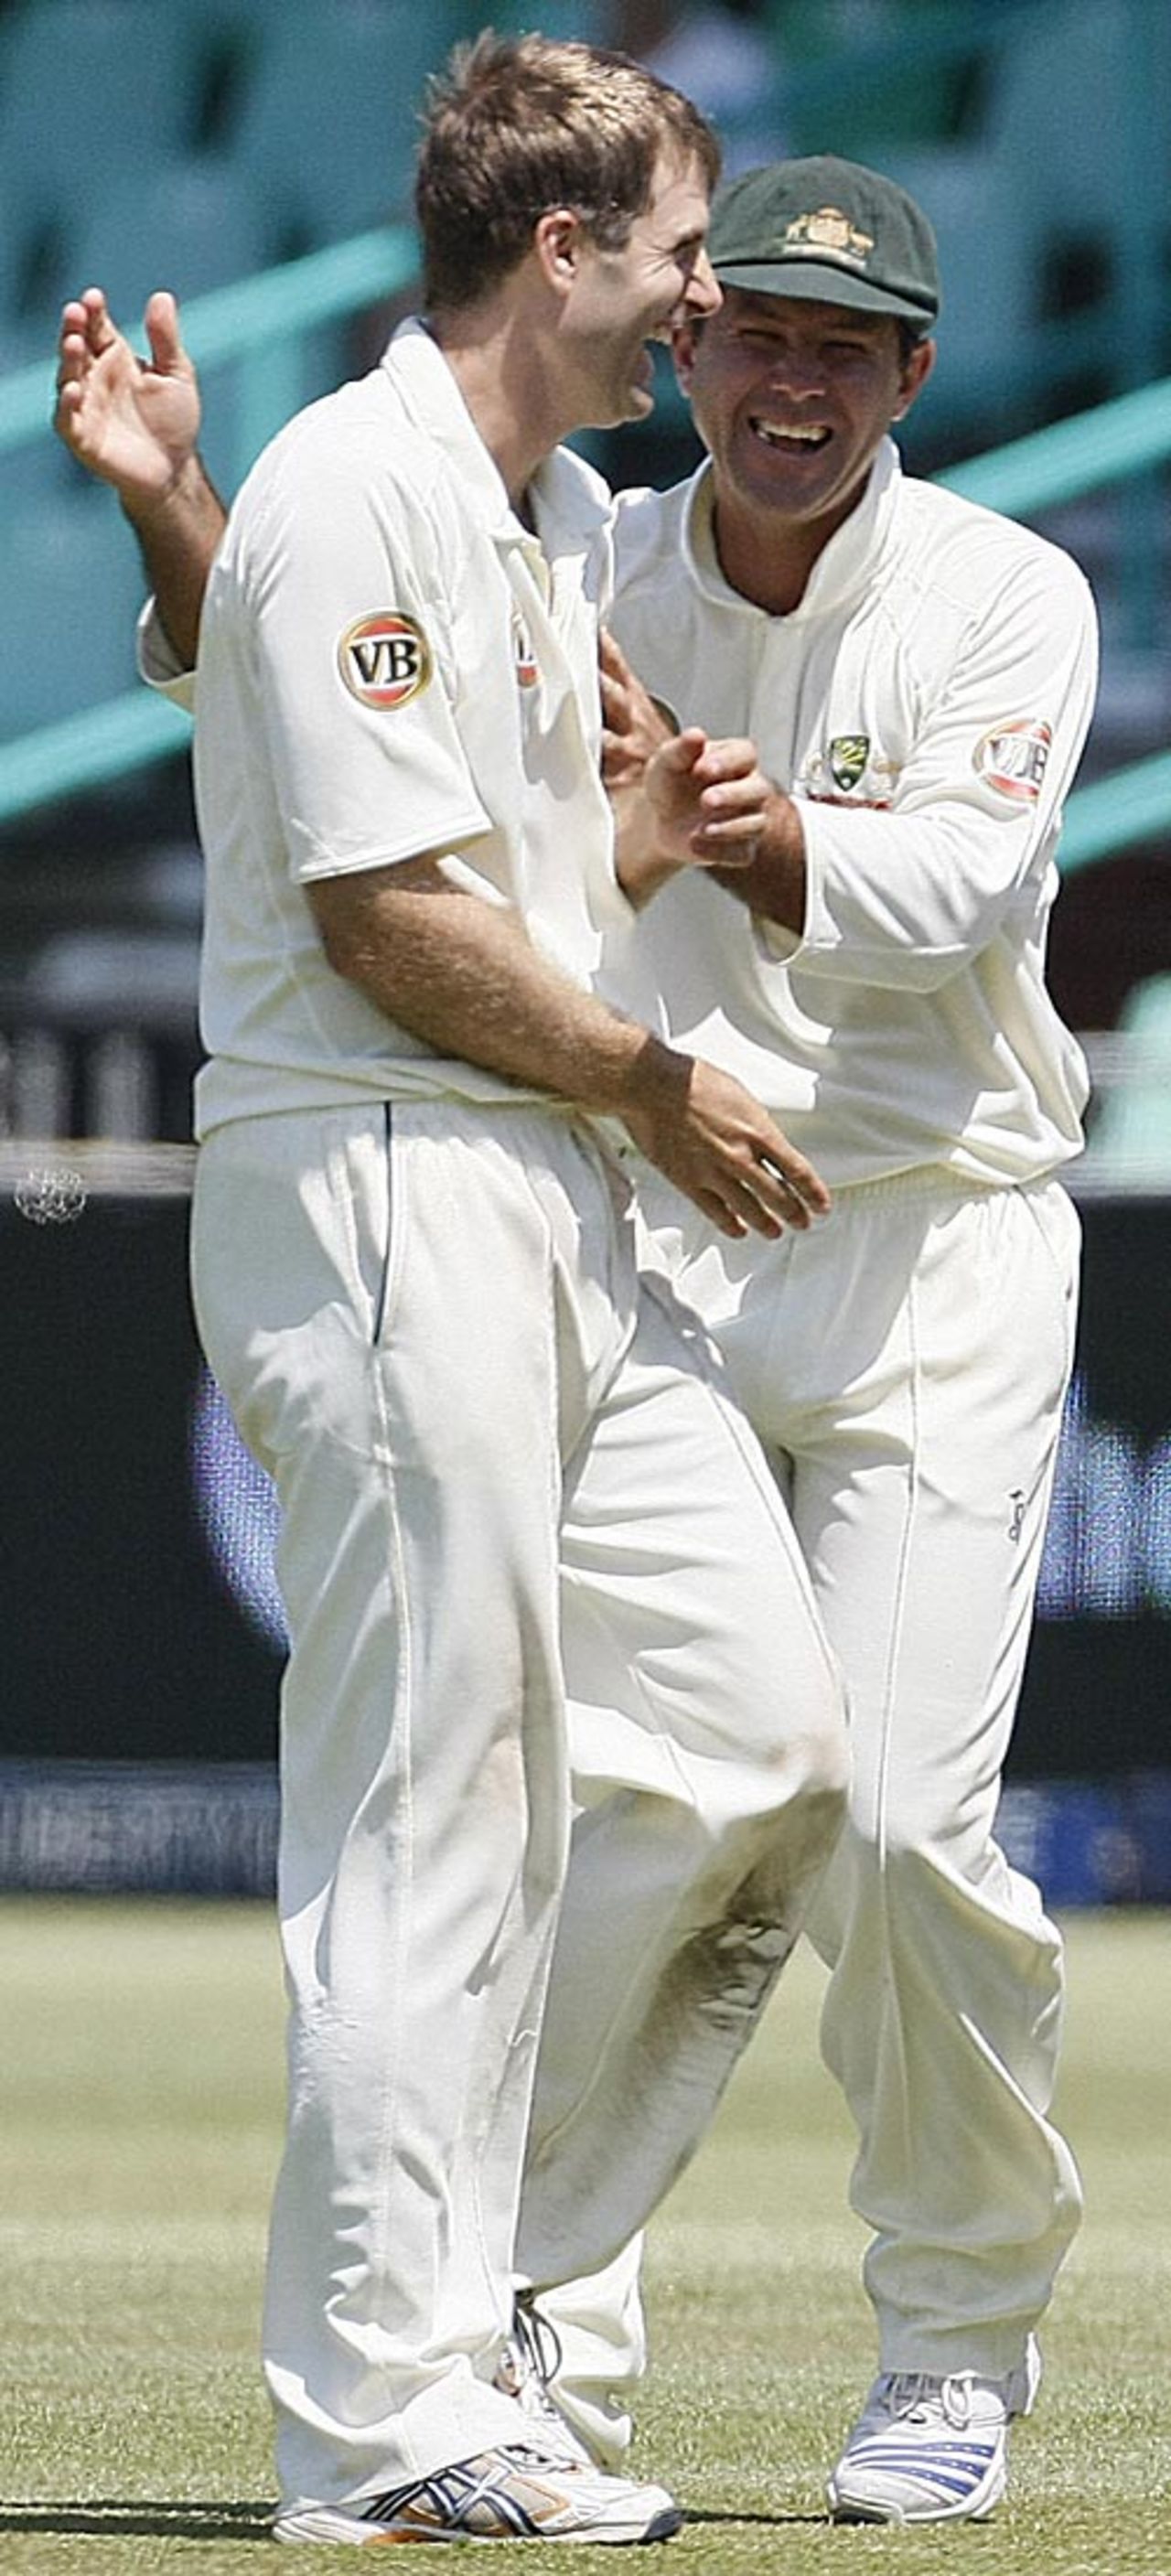 Simon Katich gets a pat from Ricky Ponting after removing Dale Steyn, South Africa v Australia, 2nd Test, Durban, 5th day, March 10, 2009